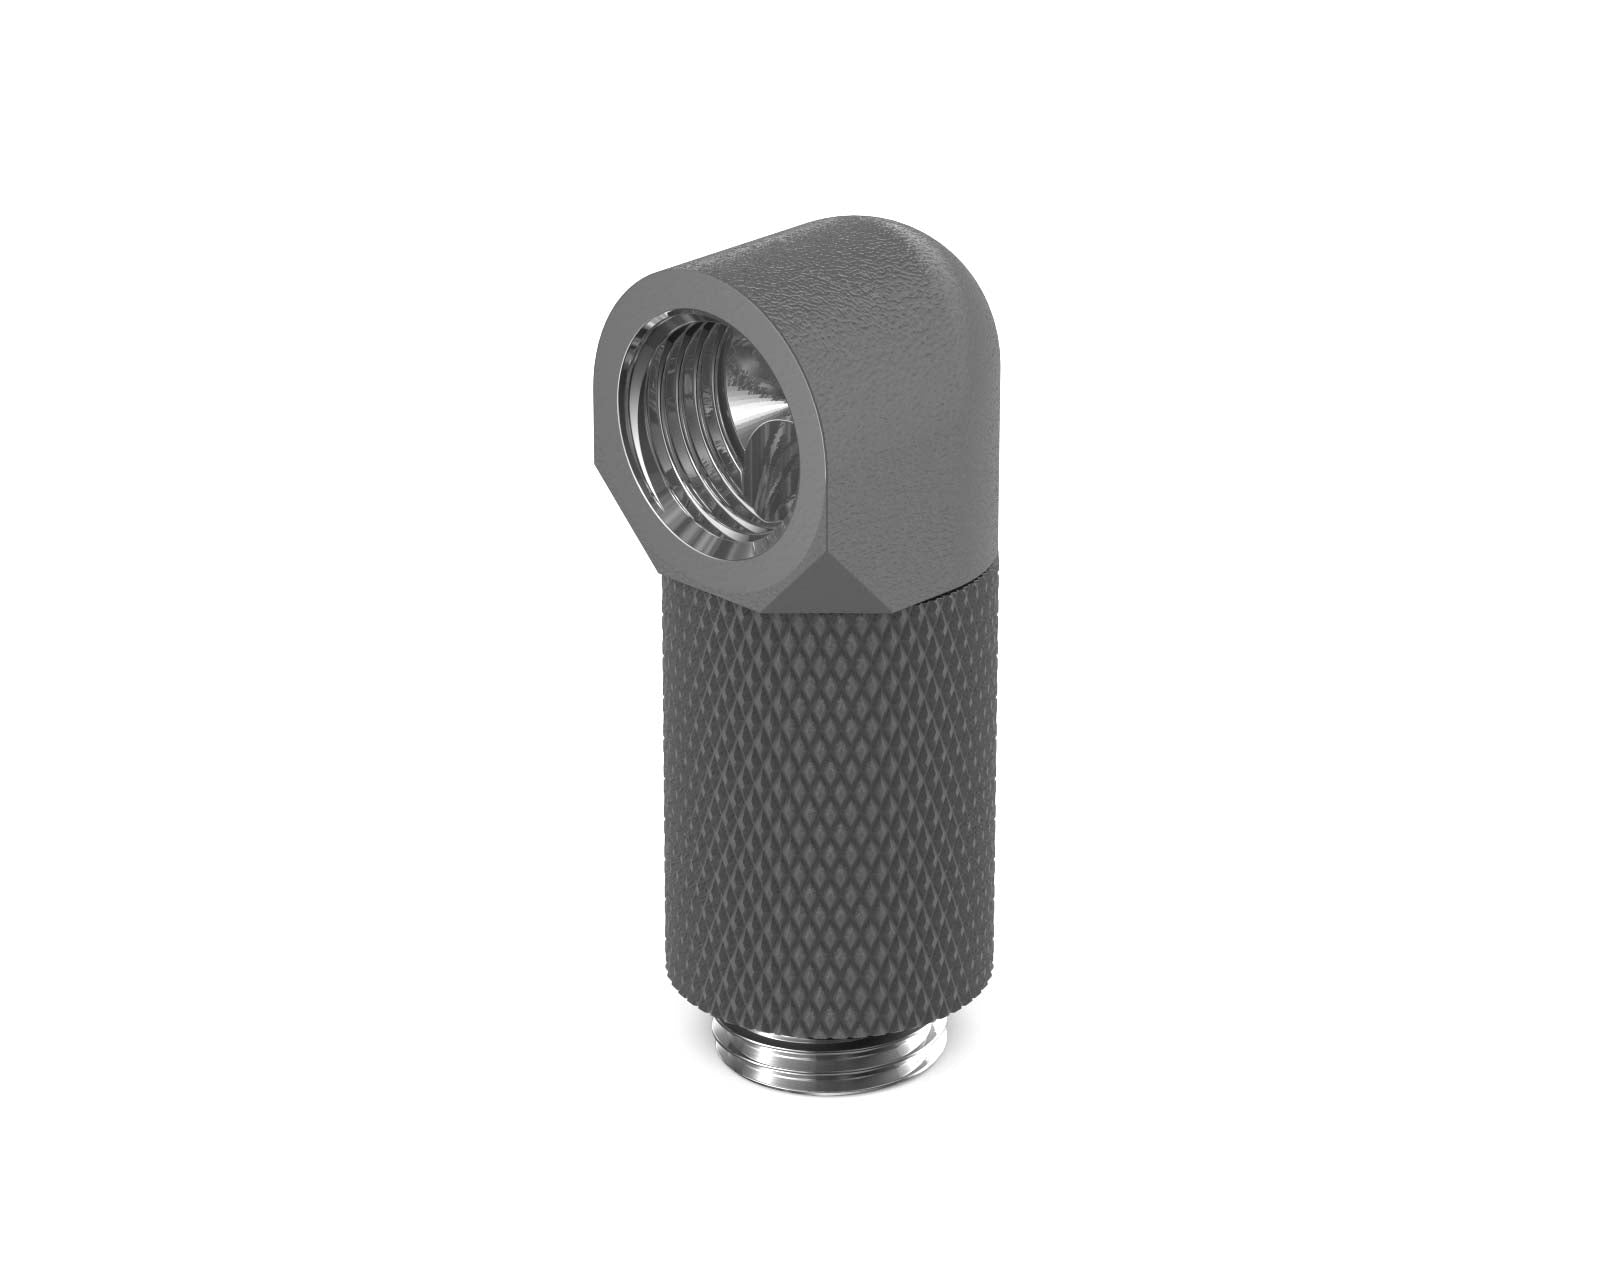 PrimoChill Male to Female G 1/4in. 90 Degree SX Rotary 25mm Extension Elbow Fitting - PrimoChill - KEEPING IT COOL TX Matte Gun Metal